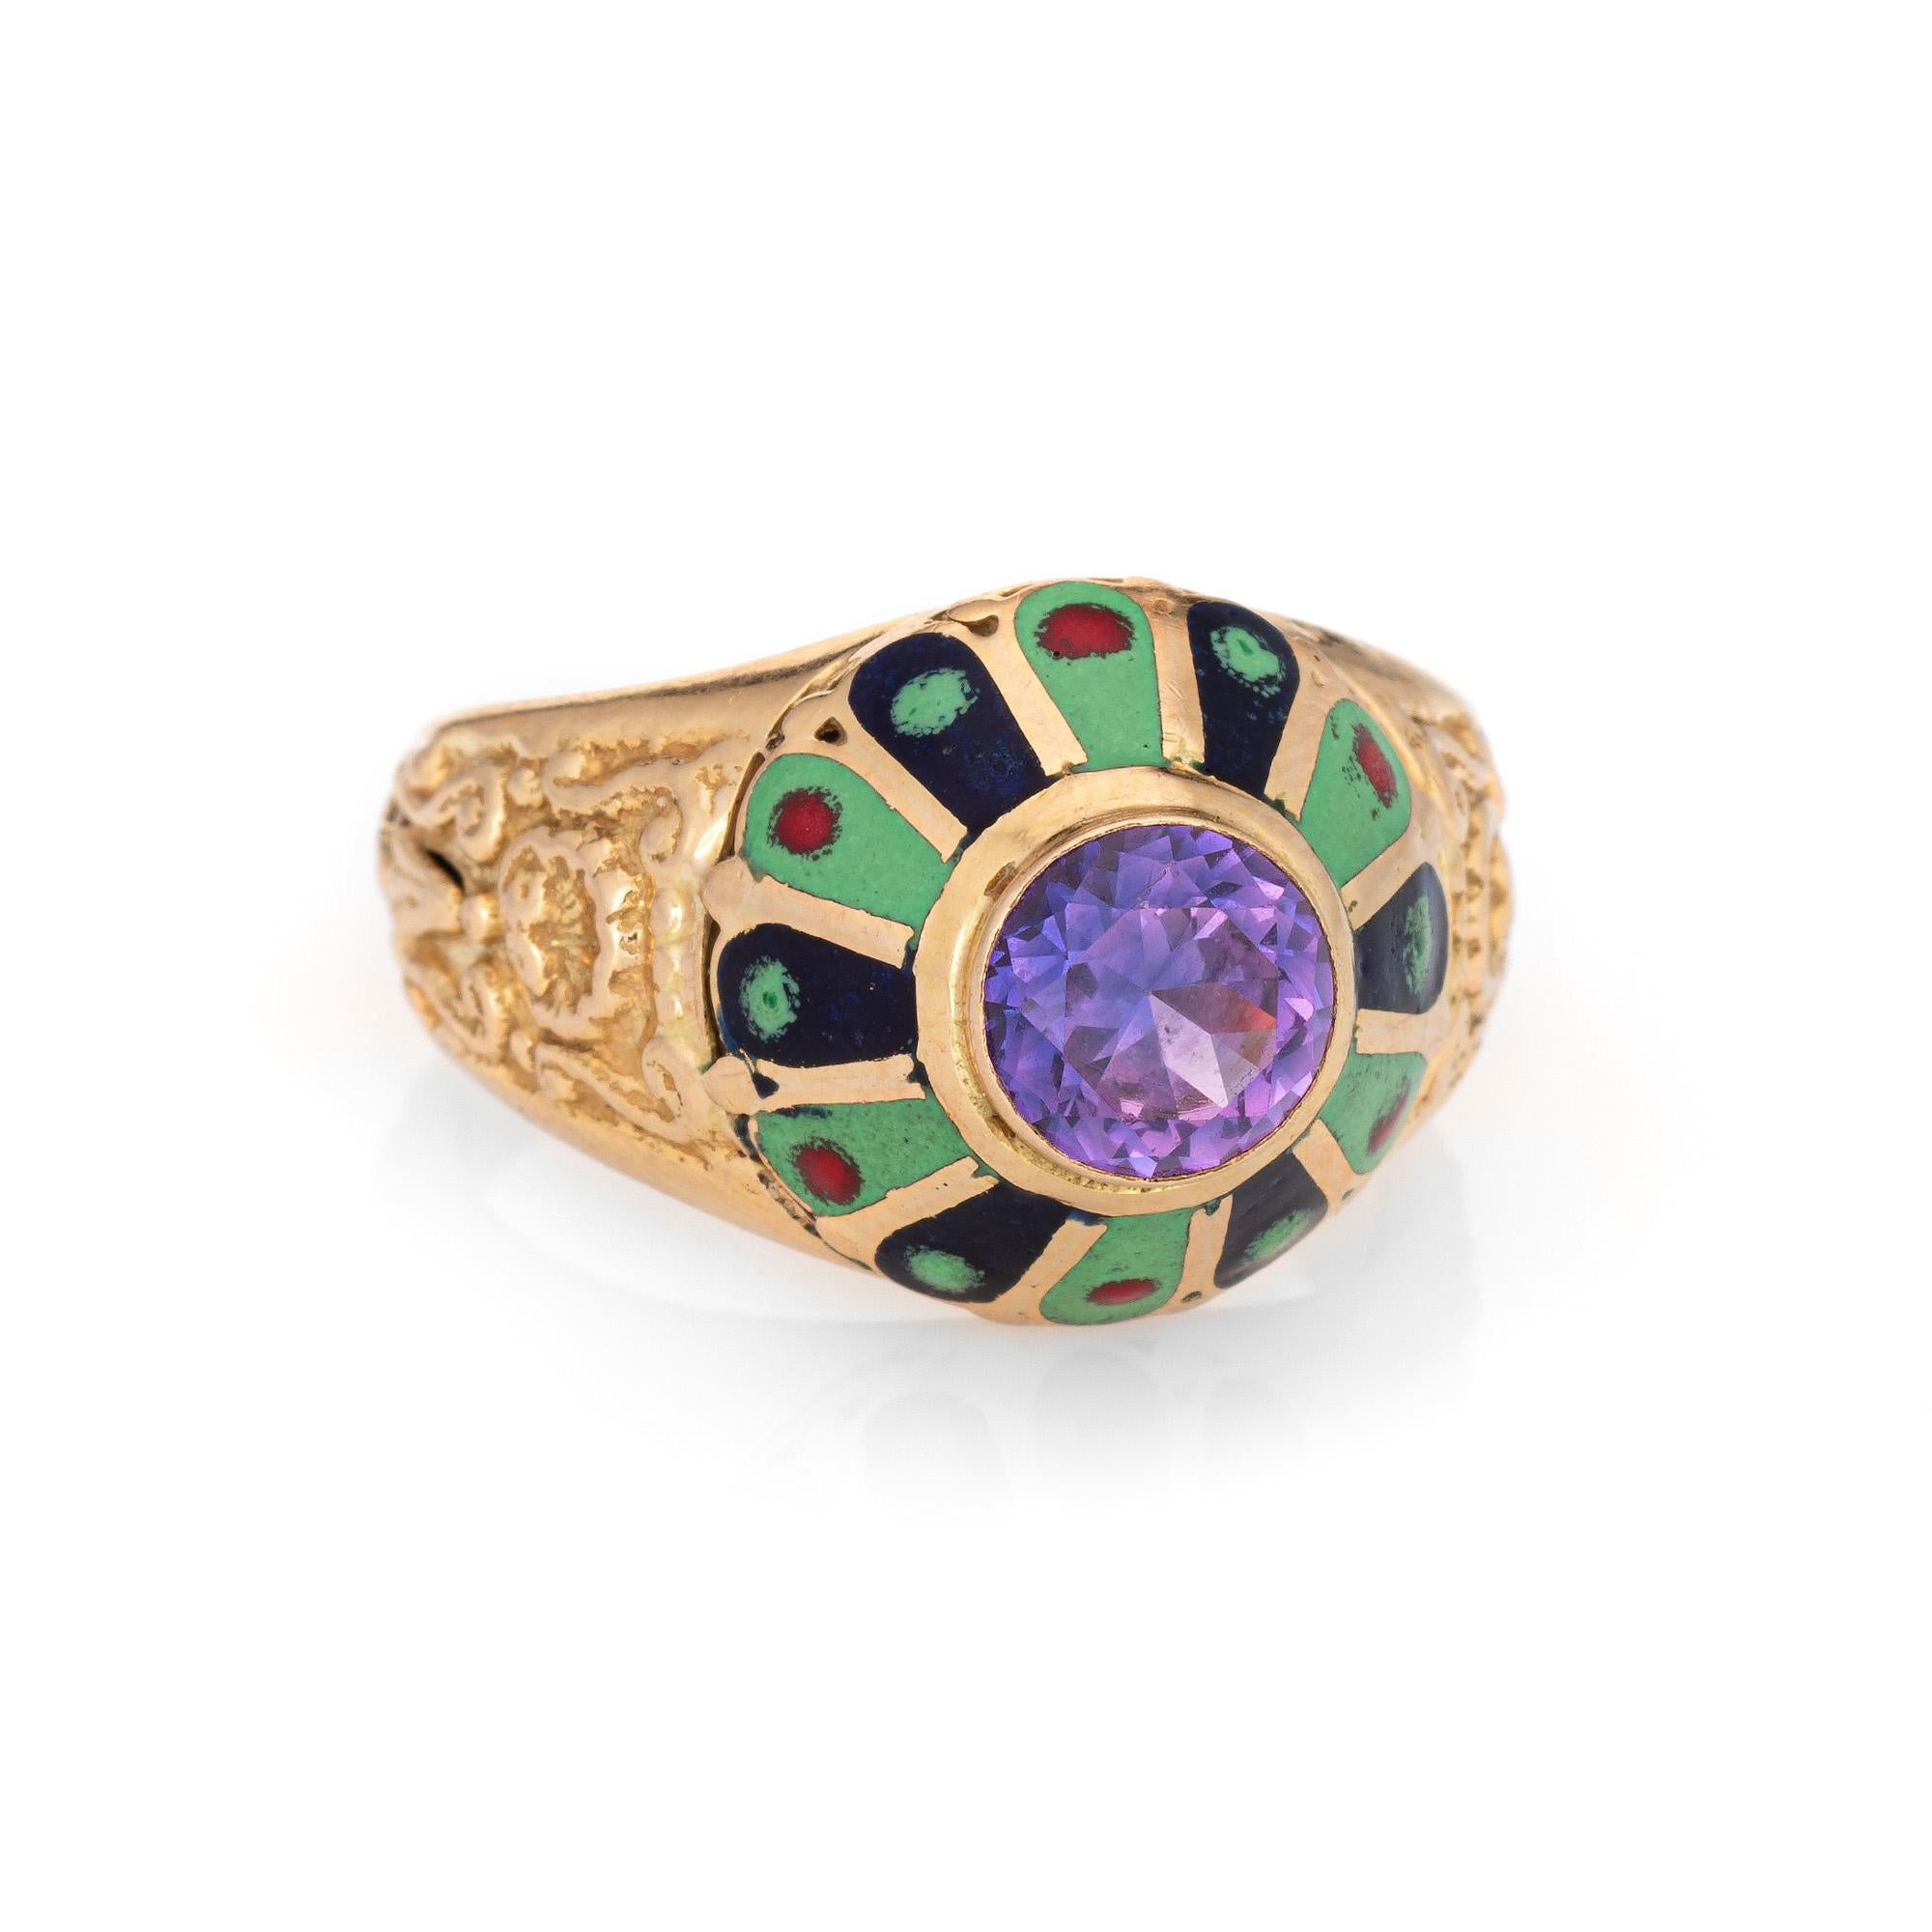 Stylish vintage Portuguese amethyst & enamel ring (circa 1960s) crafted in 19 karat yellow gold. 

Faceted round cut amethyst measures 5mm (estimated at 0.65 carats). The amethyst is in good condition with a few light surface abrasions visible under